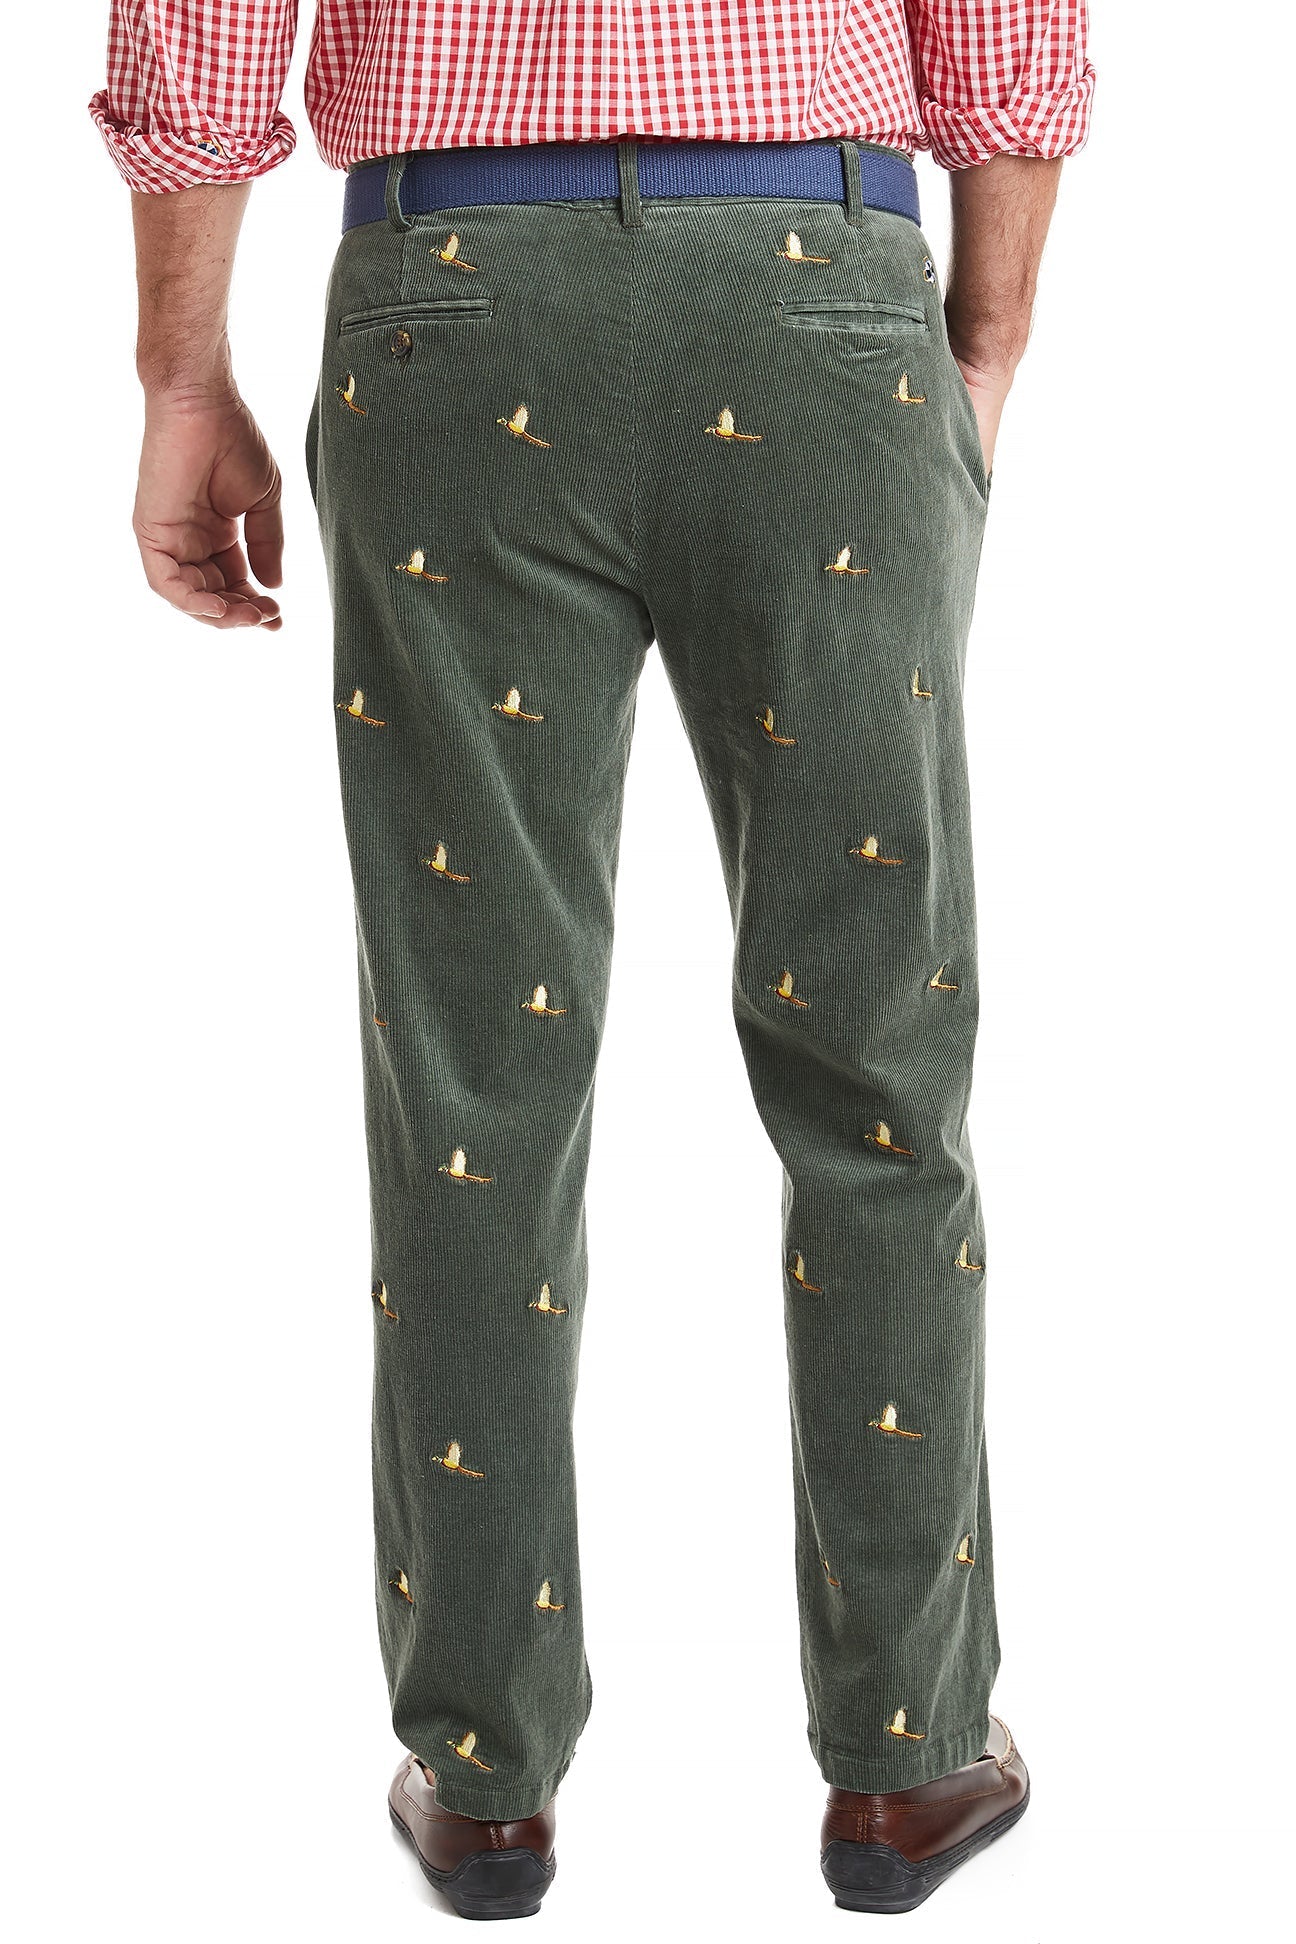 Beachcomber Corduroy Pant Olive with Pheasant MENS EMBROIDERED PANTS Castaway Nantucket Island